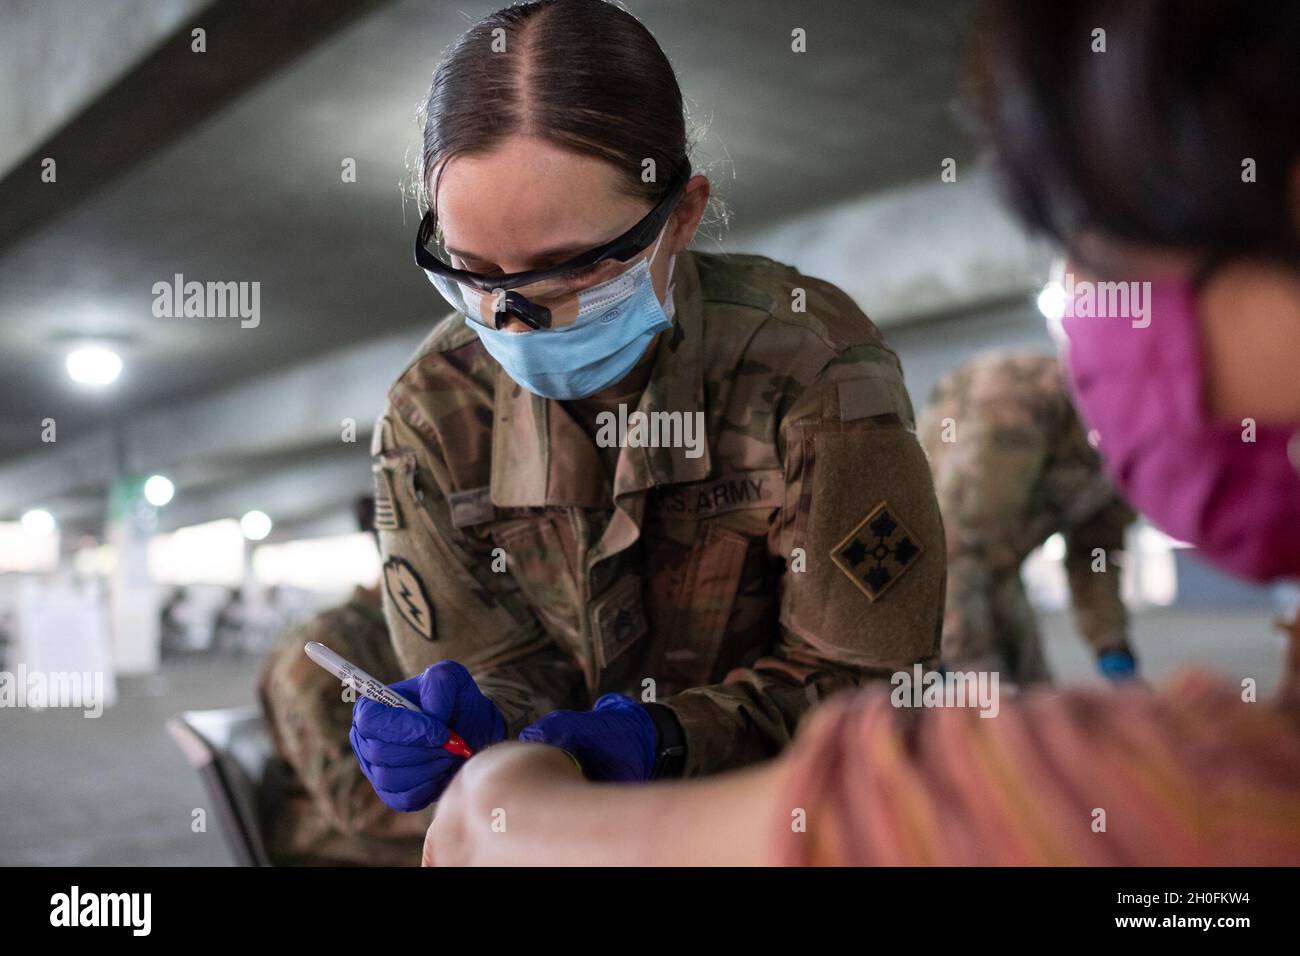 U.S. Army Staff Sgt. Kirsten Pavao of La Habra, Calif., a combat medic assigned to Headquarters and Headquarters Battery, 2nd Battalion, 12th Field Artillery Regiment, 1st Stryker Brigade Combat Team, 4th Infantry Division, administers the COVID vaccine at the California State University Los Angeles Community Vaccination Center, Feb. 26, 2021. Pavao vaccinated people at the CVC at Cal State LA. U.S. Northern Command, through U.S. Army North, remains committed to providing continued, flexible Department of Defense support to the Federal Emergency Management Agency as part of the whole-of-govern Stock Photo